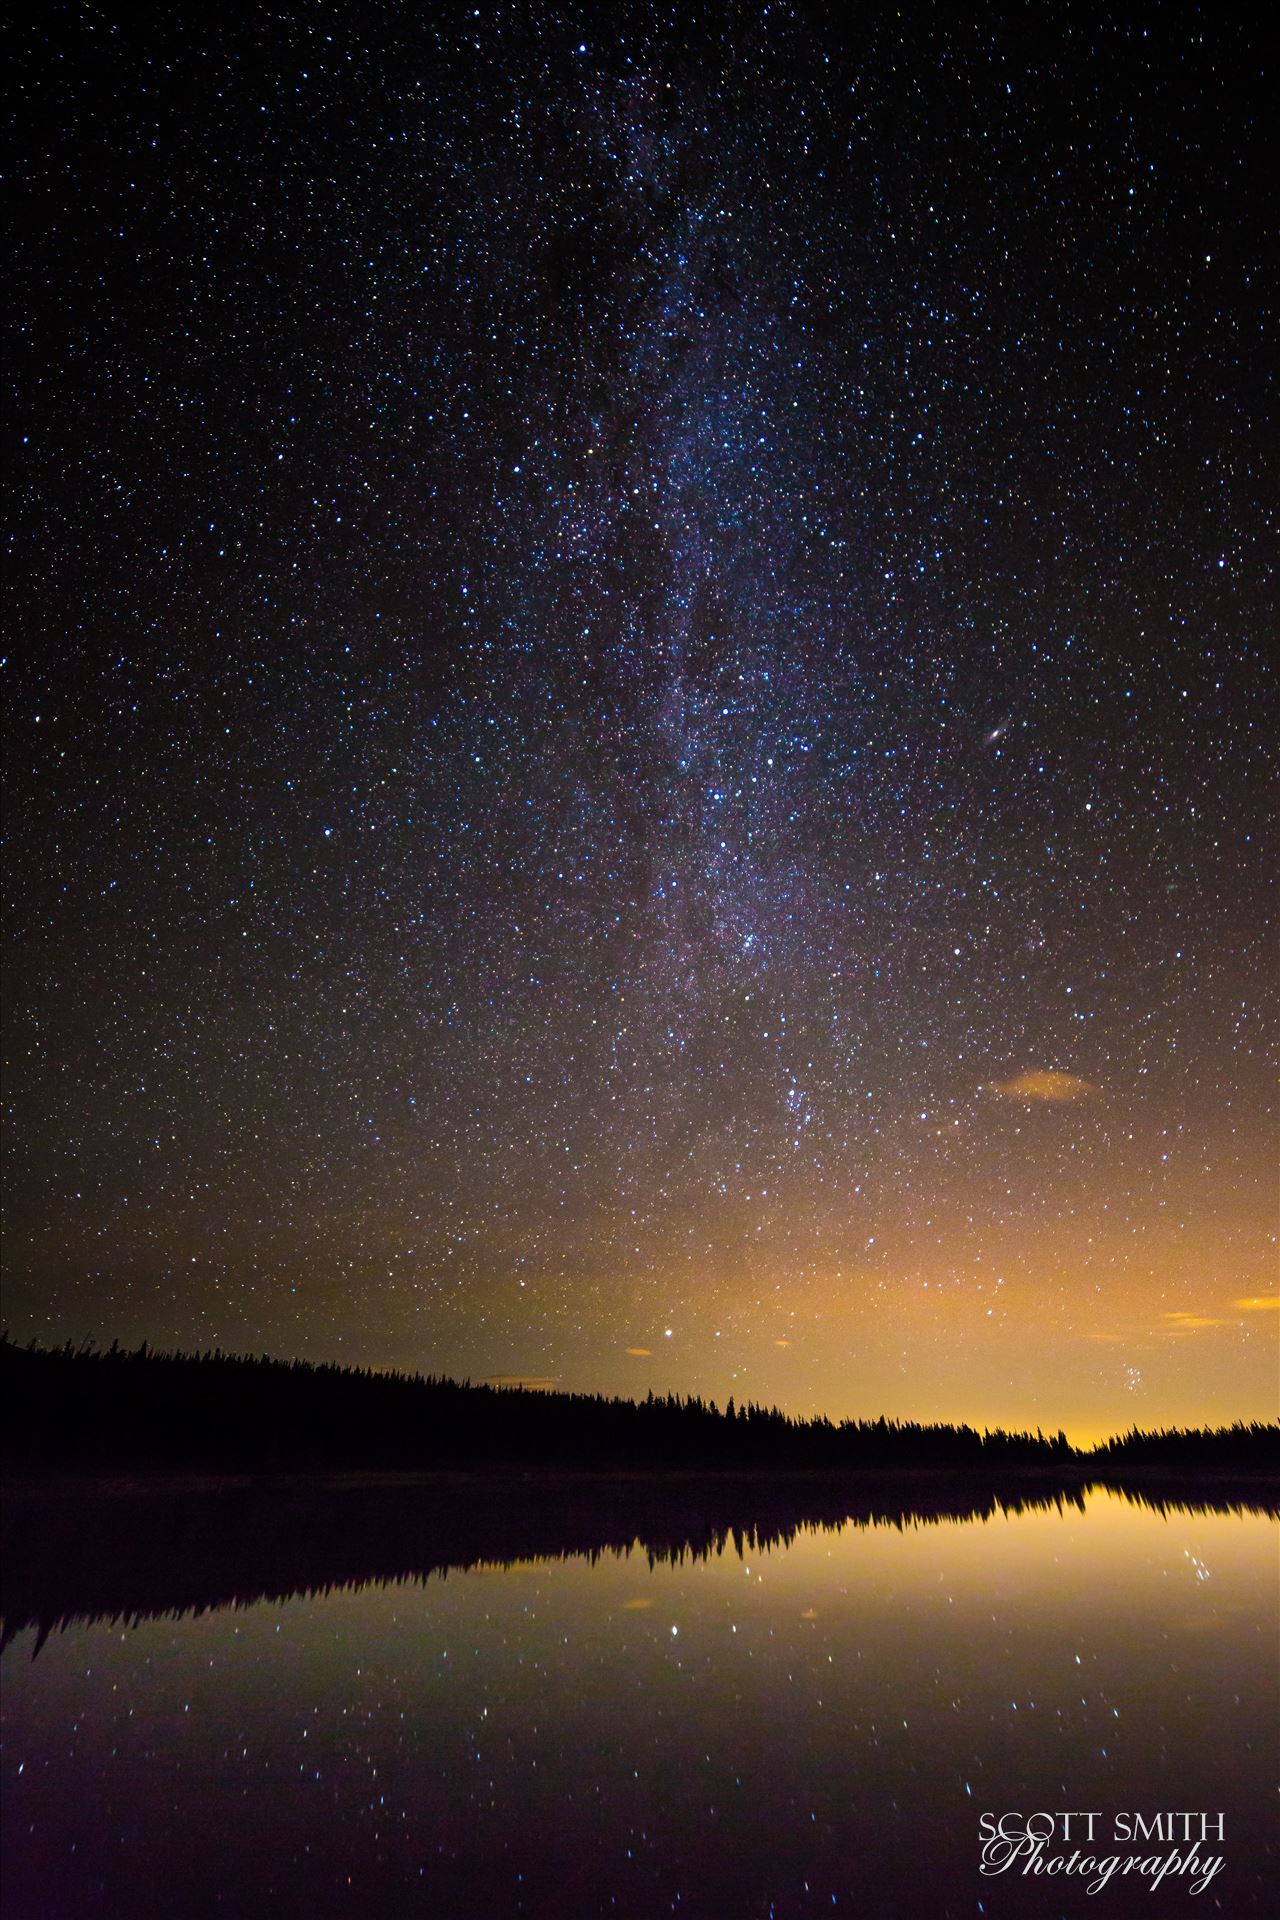 Milky Way over Brainard Lake - The Milky Way over Brainard Lake, on August 13th, during the Perseid meteor shower. No meteorites show in the image, but the reflection of the stars on the water is striking. The Andromeda galaxy makes an appearance, in the middle of the right half of the by Scott Smith Photos